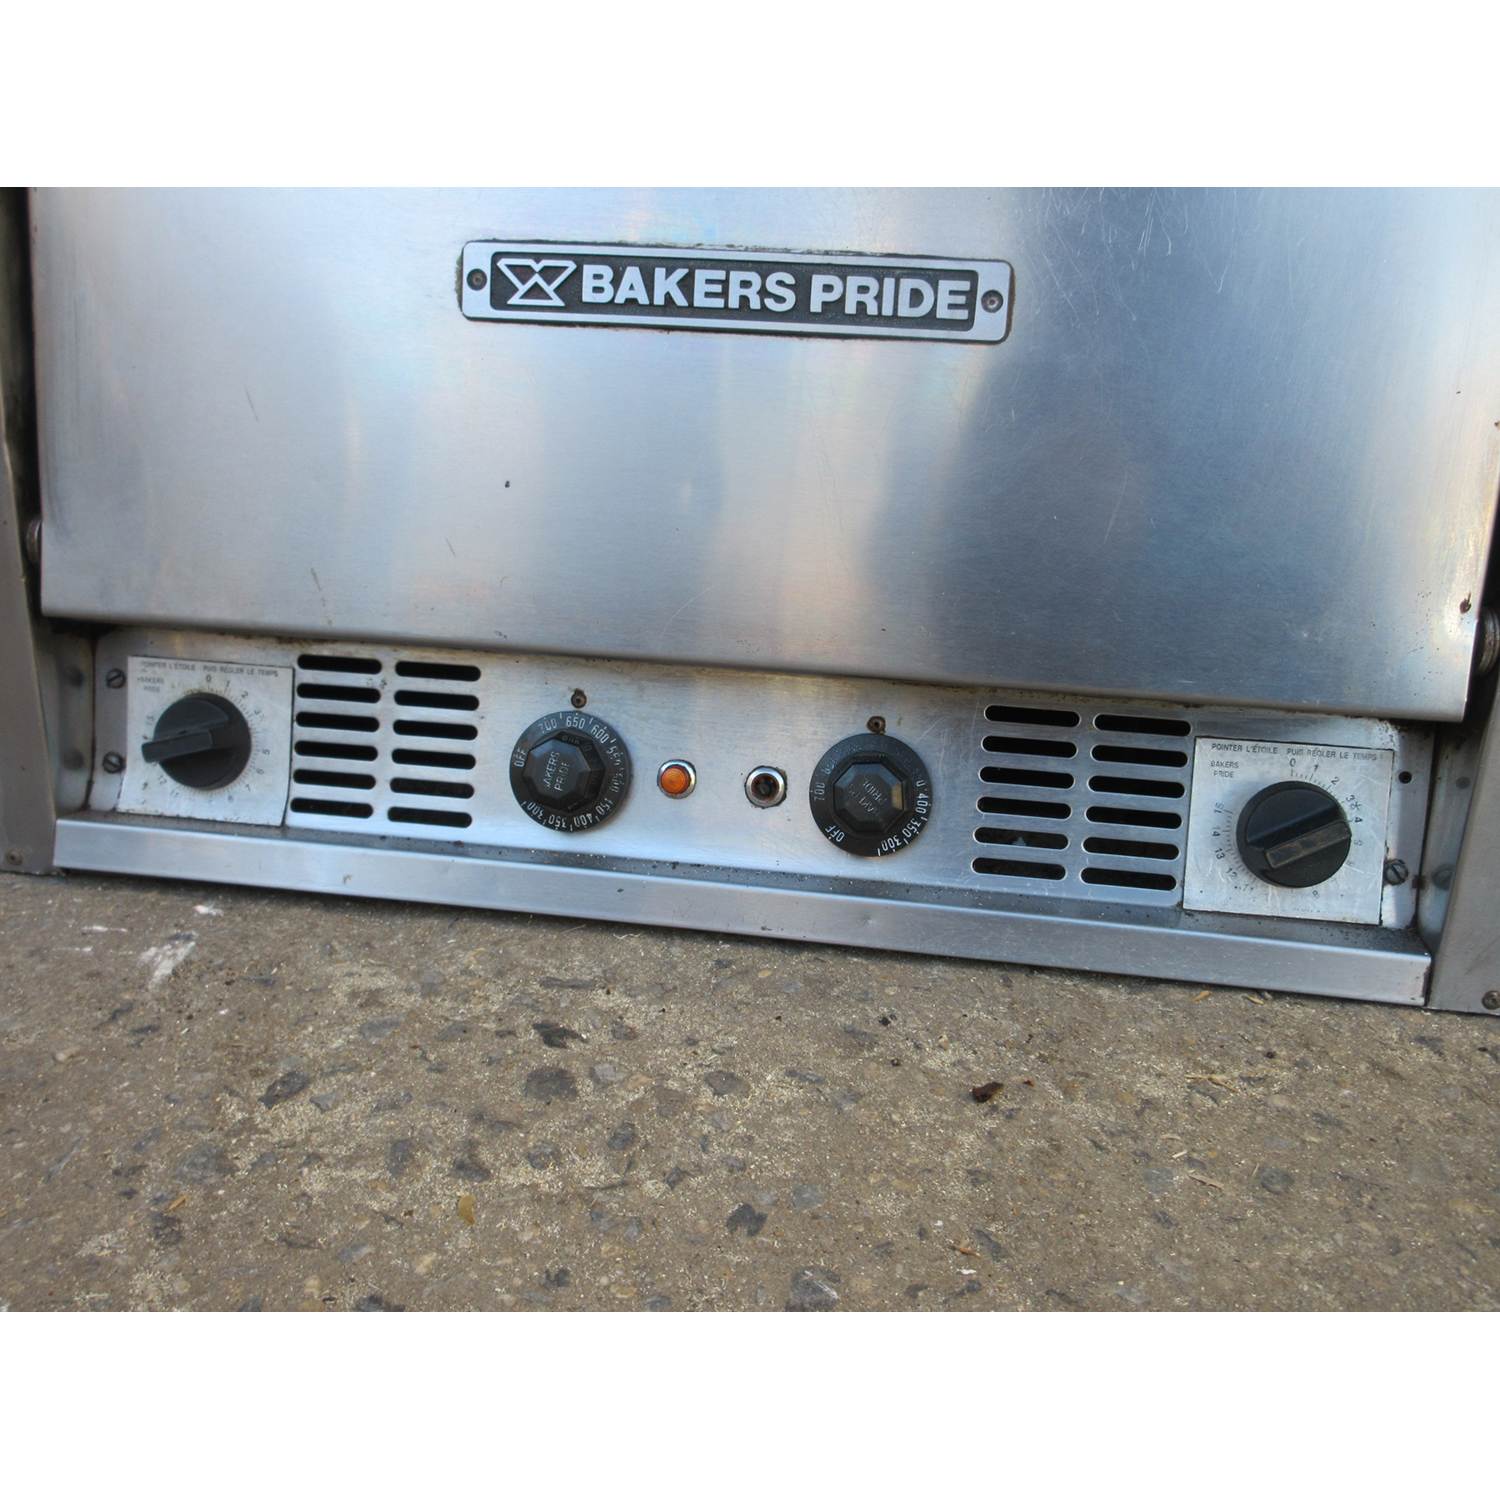 Bakers Pride P44 Countertop Pizza Oven, Electric, Used Excellent Condition image 1